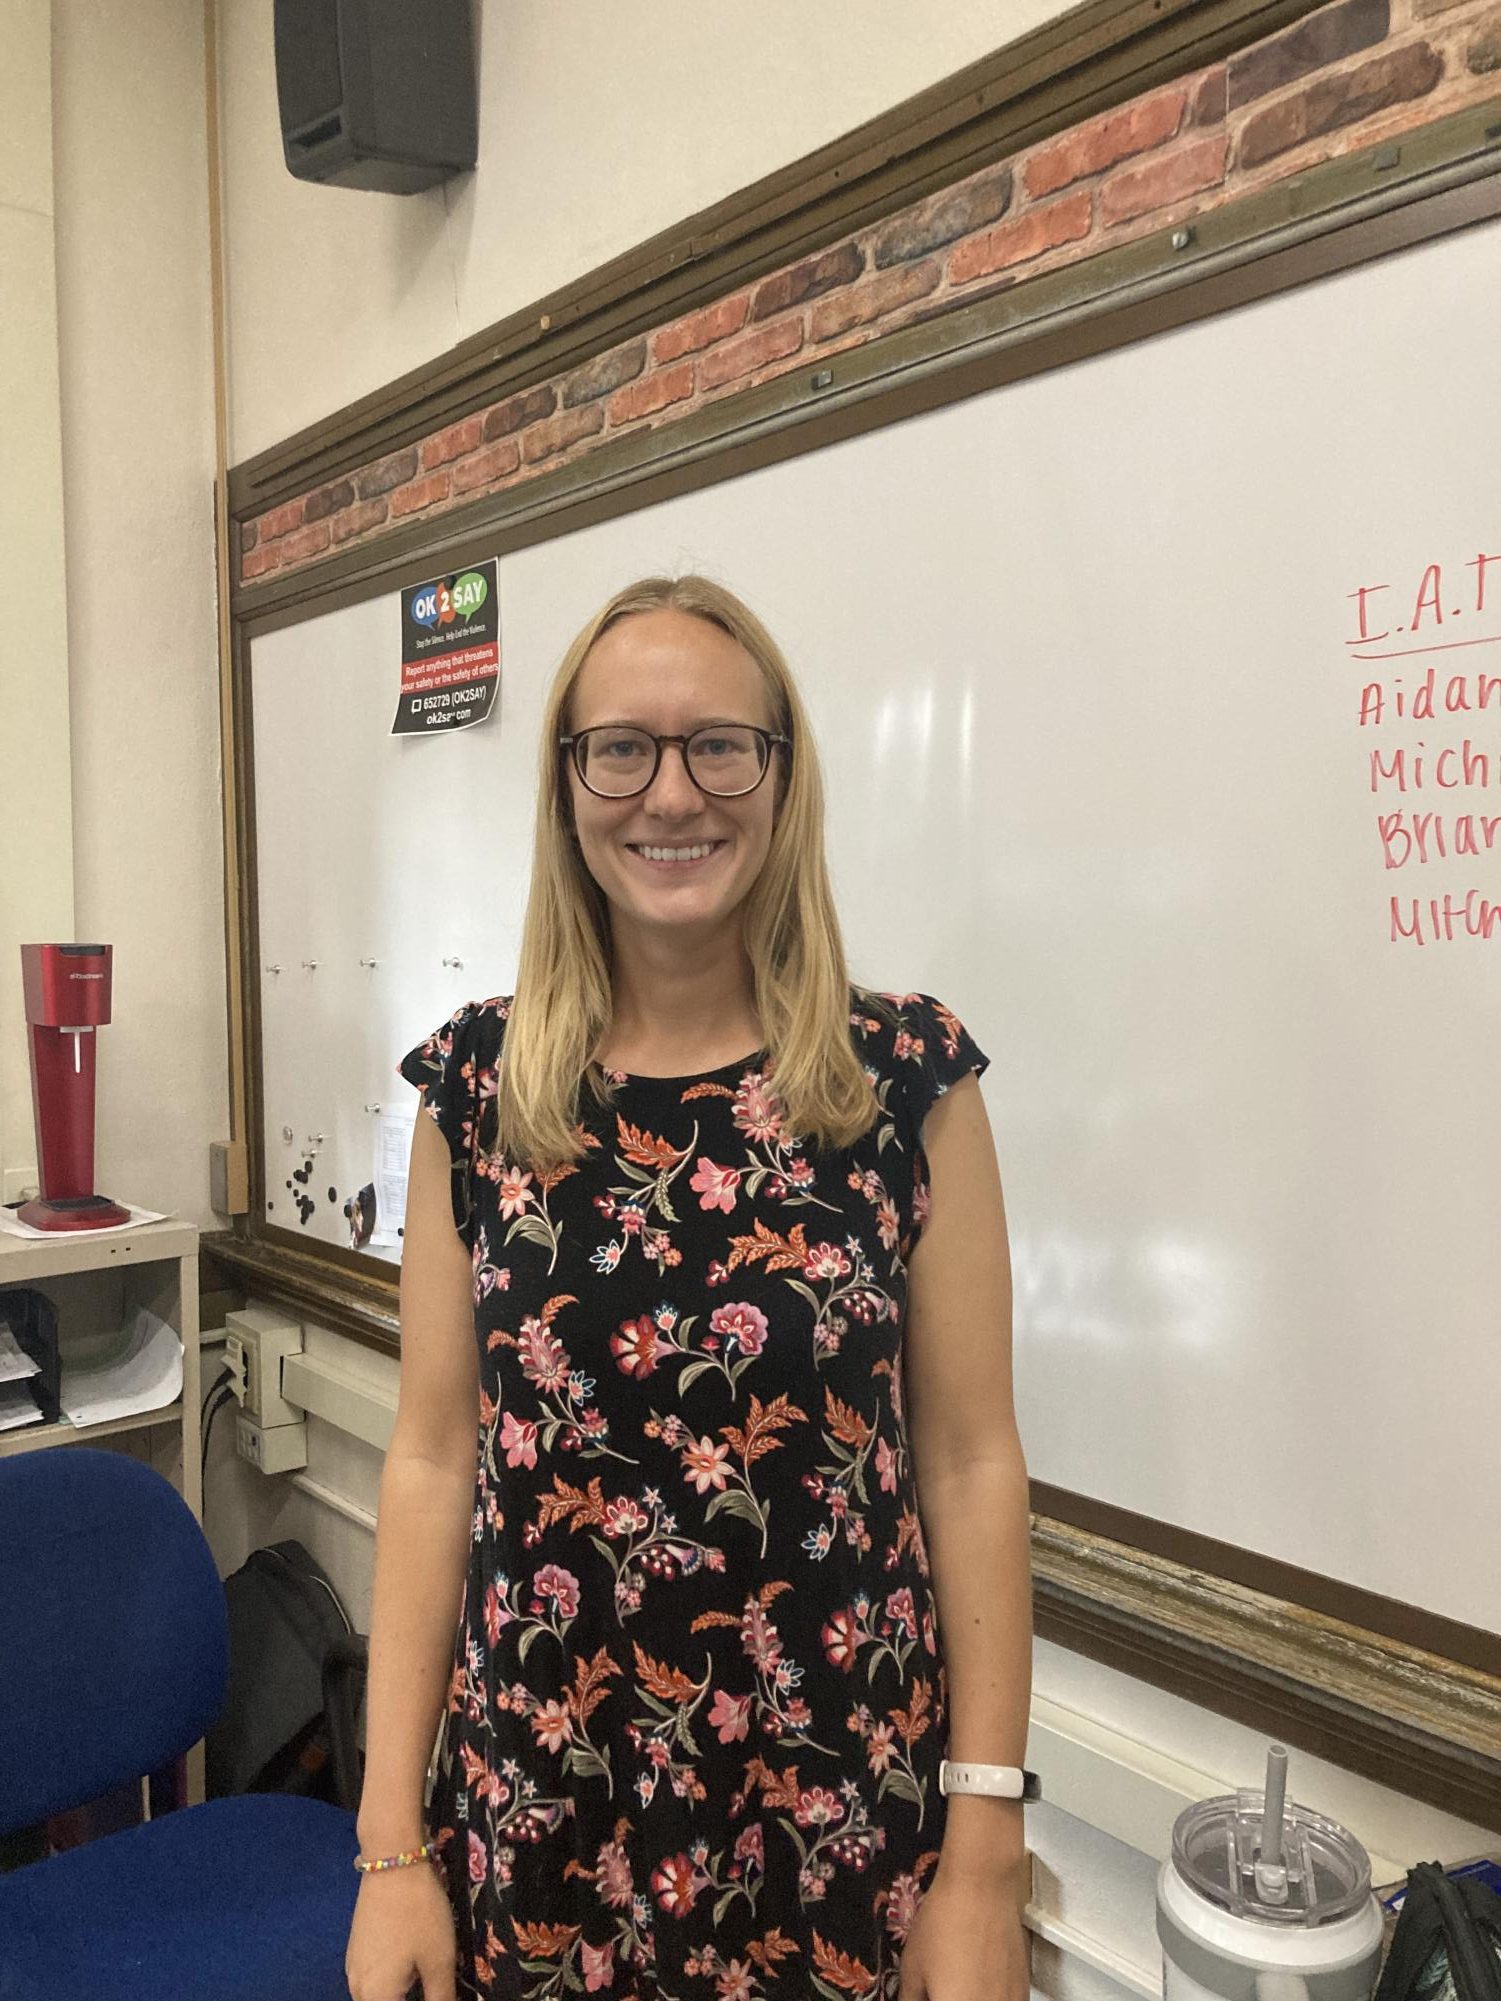 Barbour is excited to take on her new role in NHS, “They needed a new advisor, and I’ve always been interested in Student activities,” Barbour said.
